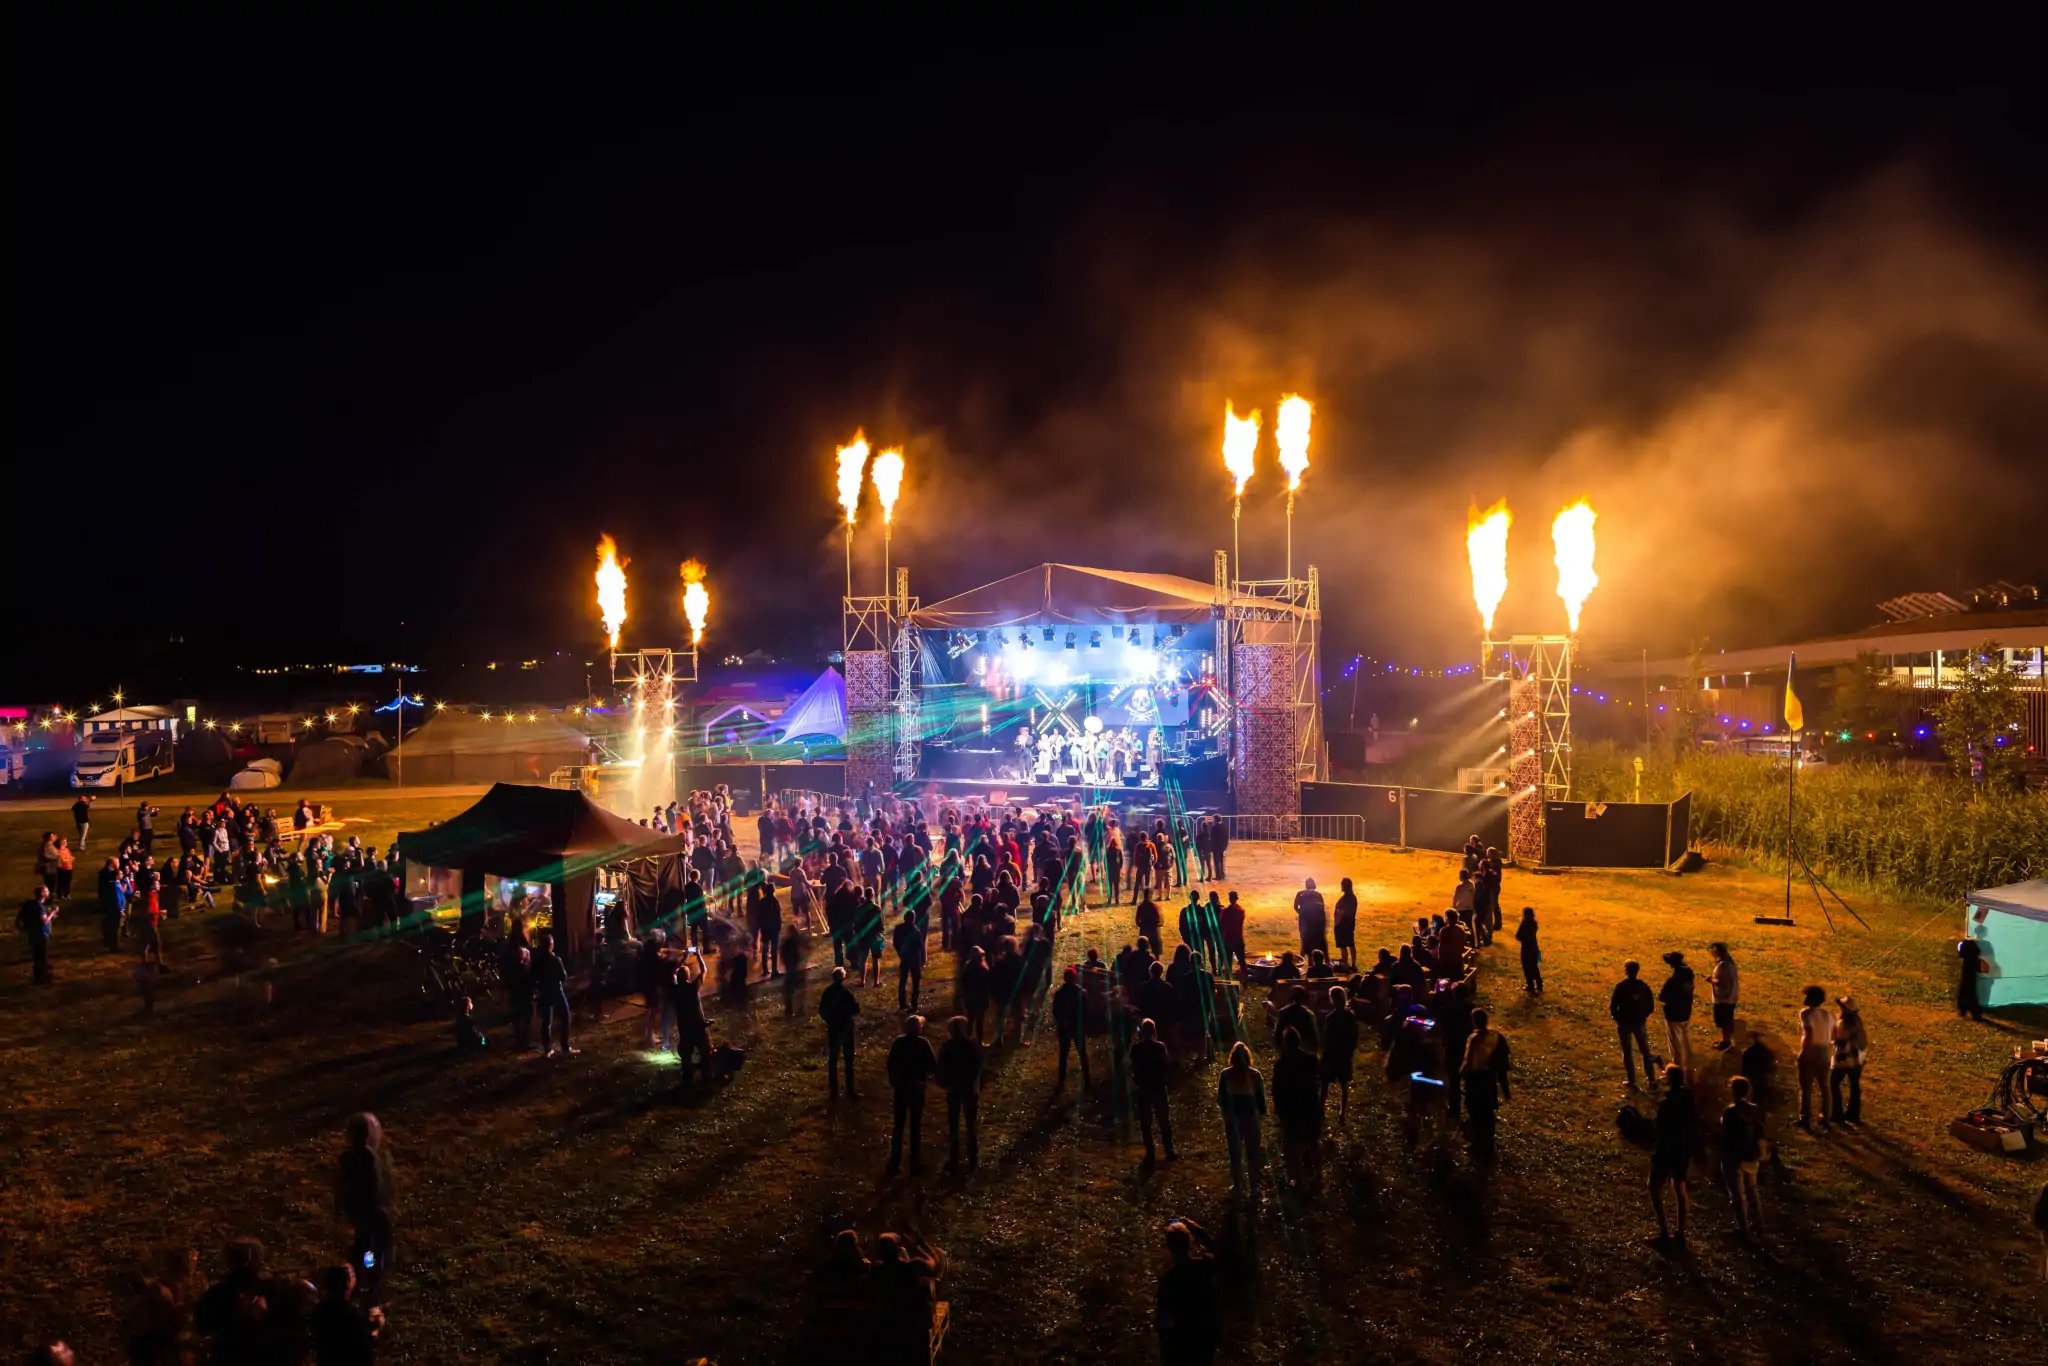 Main stage with lasers and flame throwers